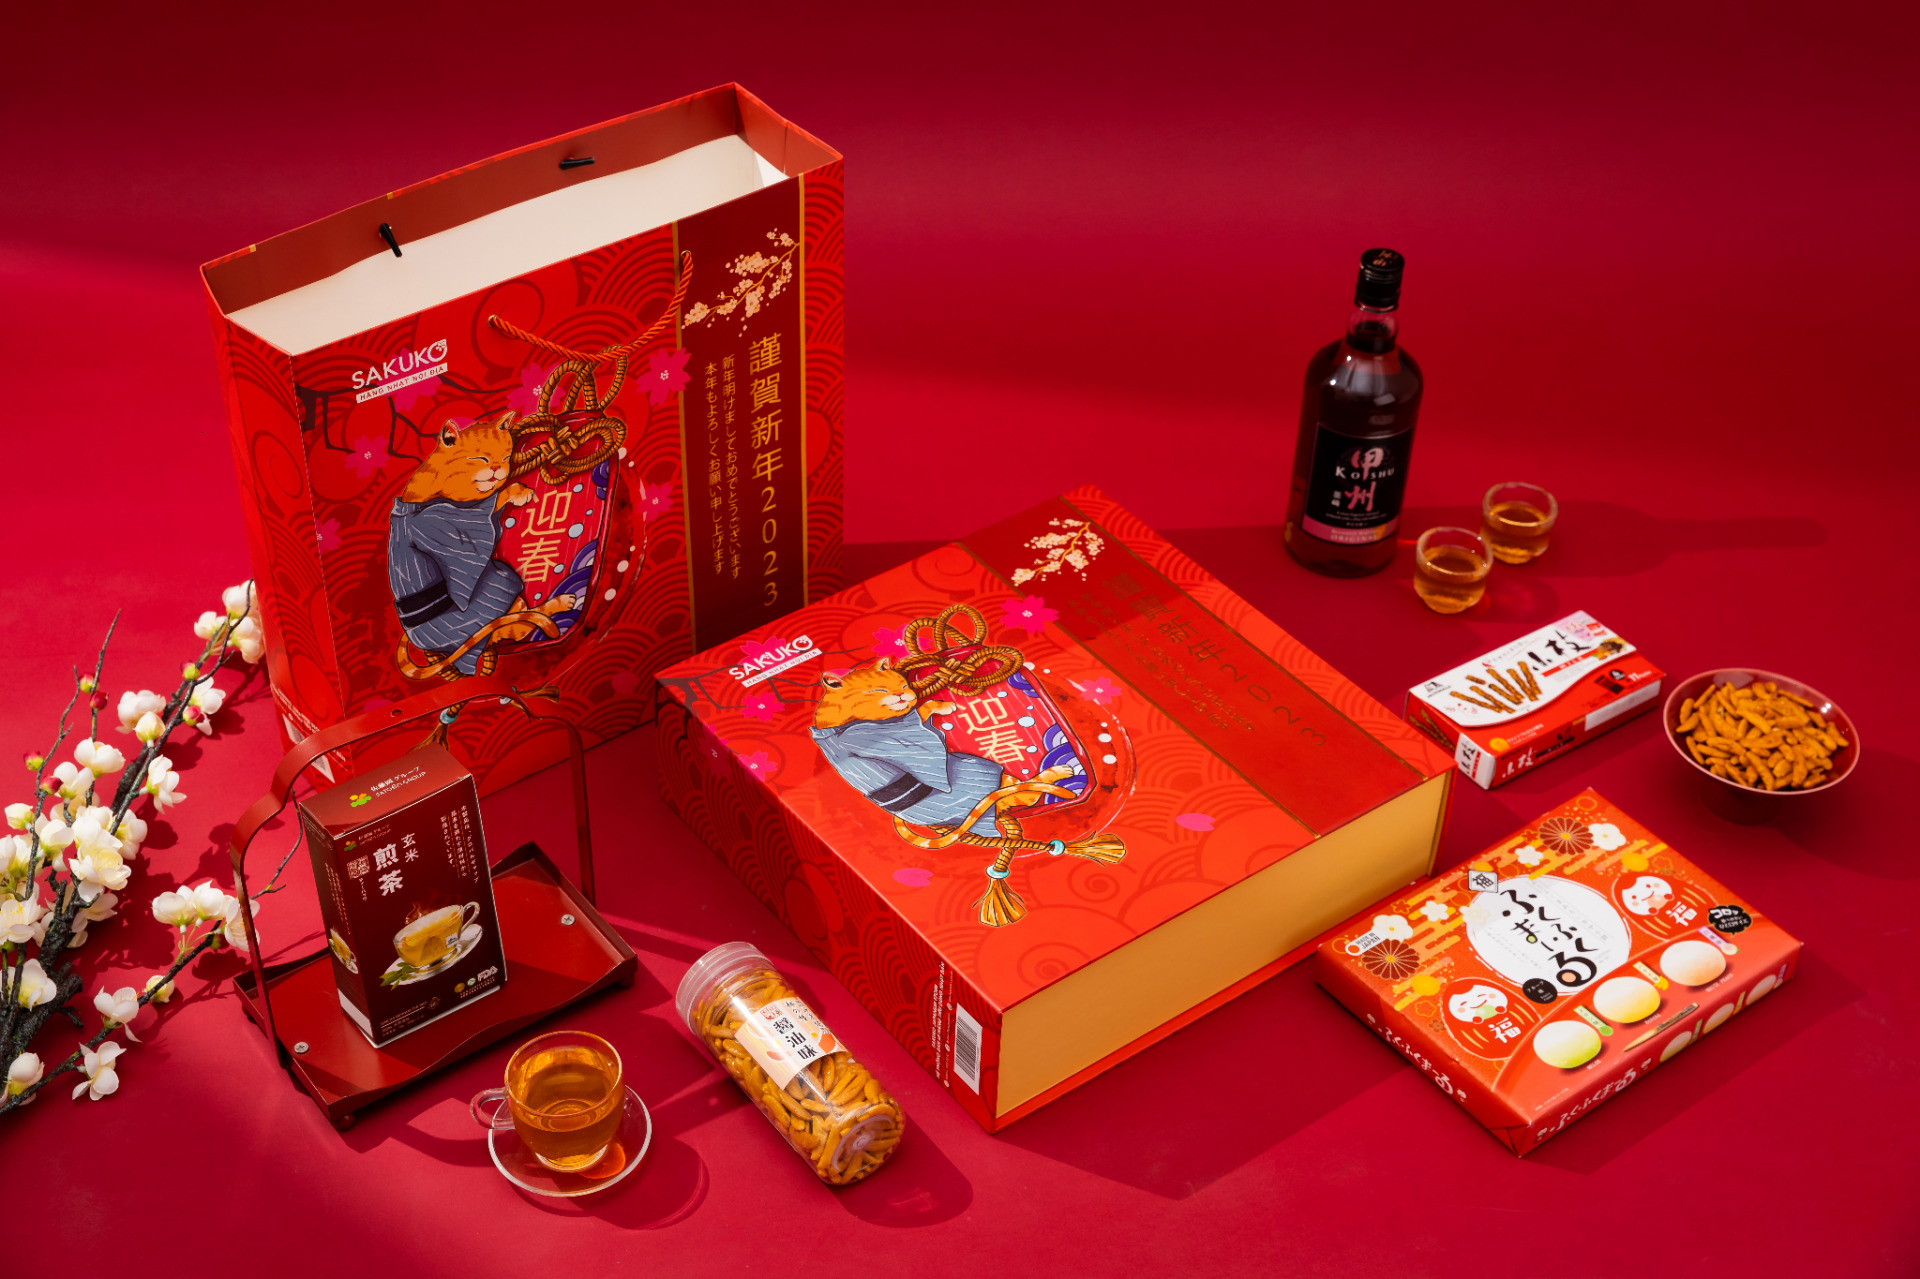 12+ of the best Vietnamese New Year gift ideas for your loved ones